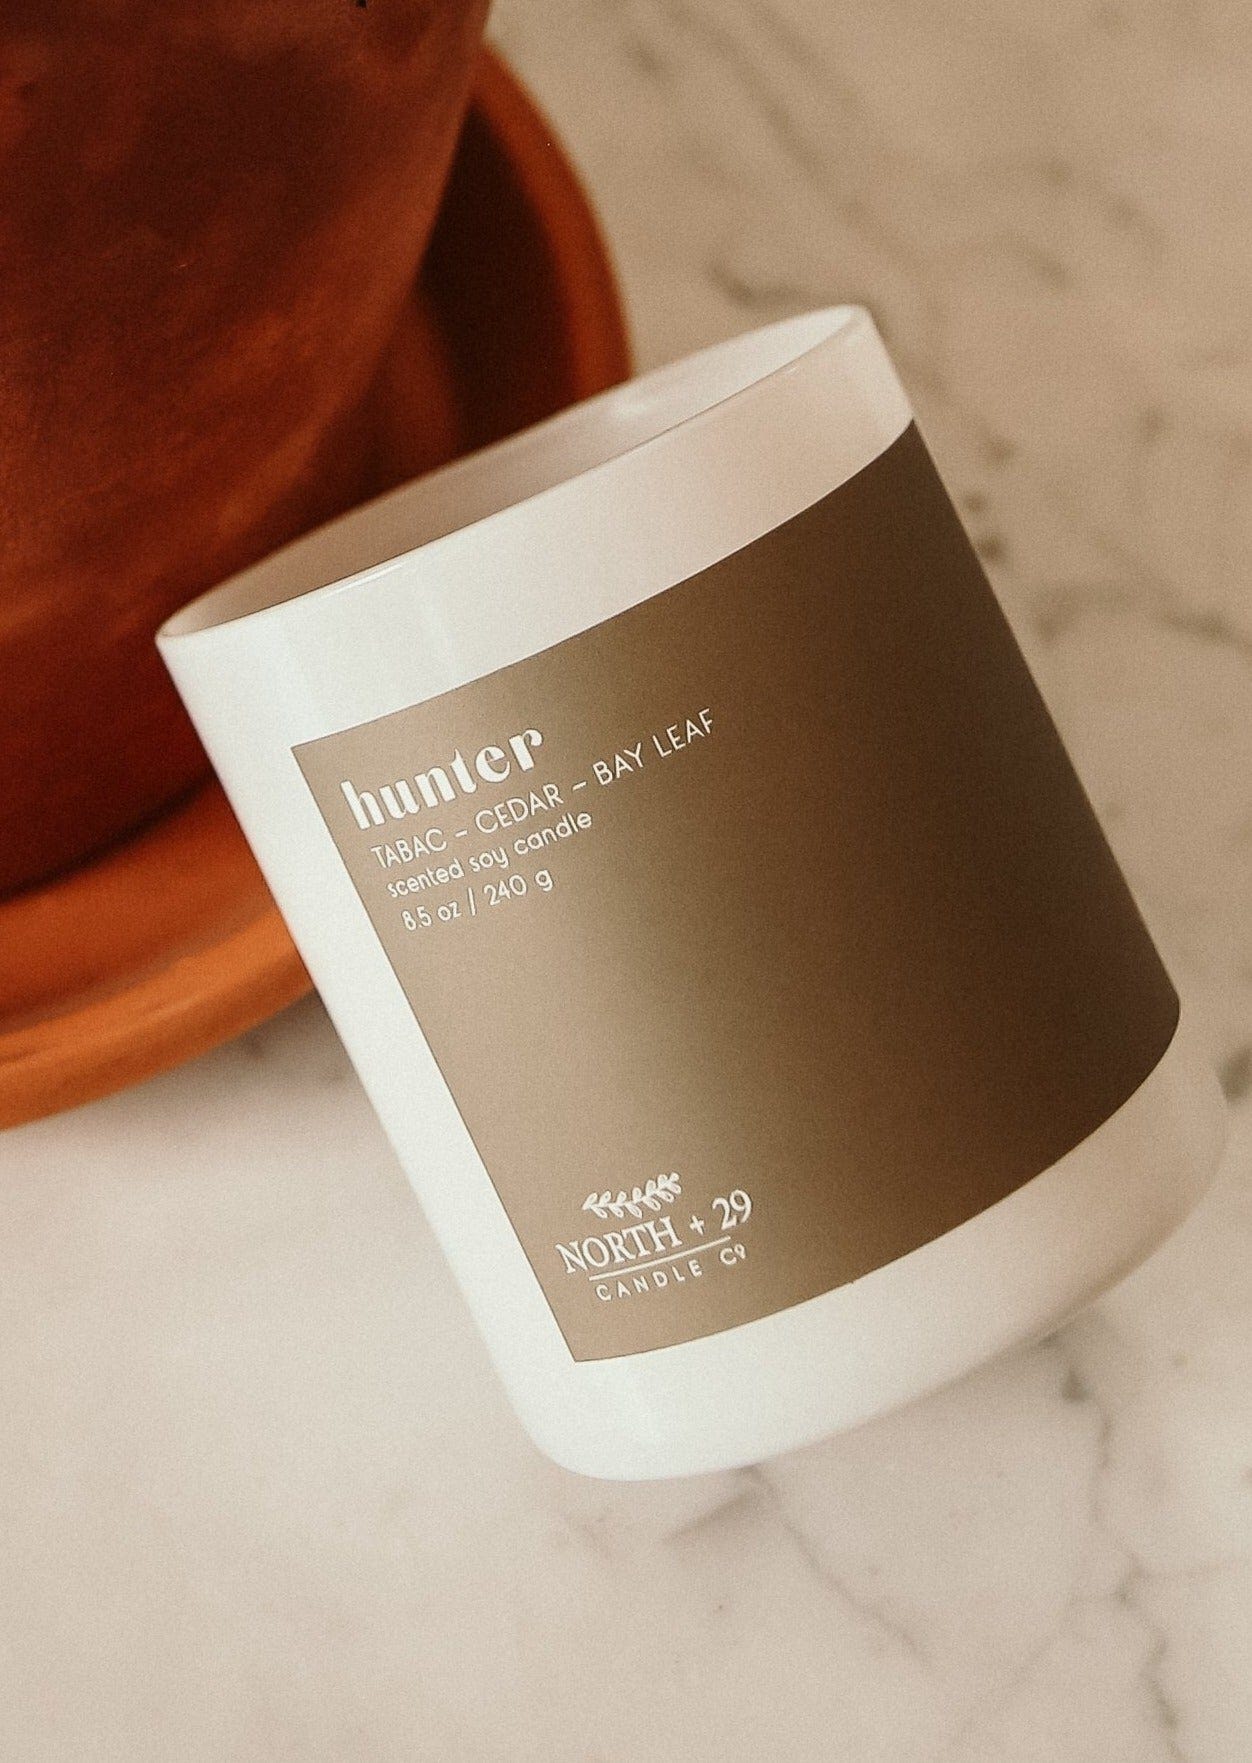 north + 29 candle co: hunter – Mint